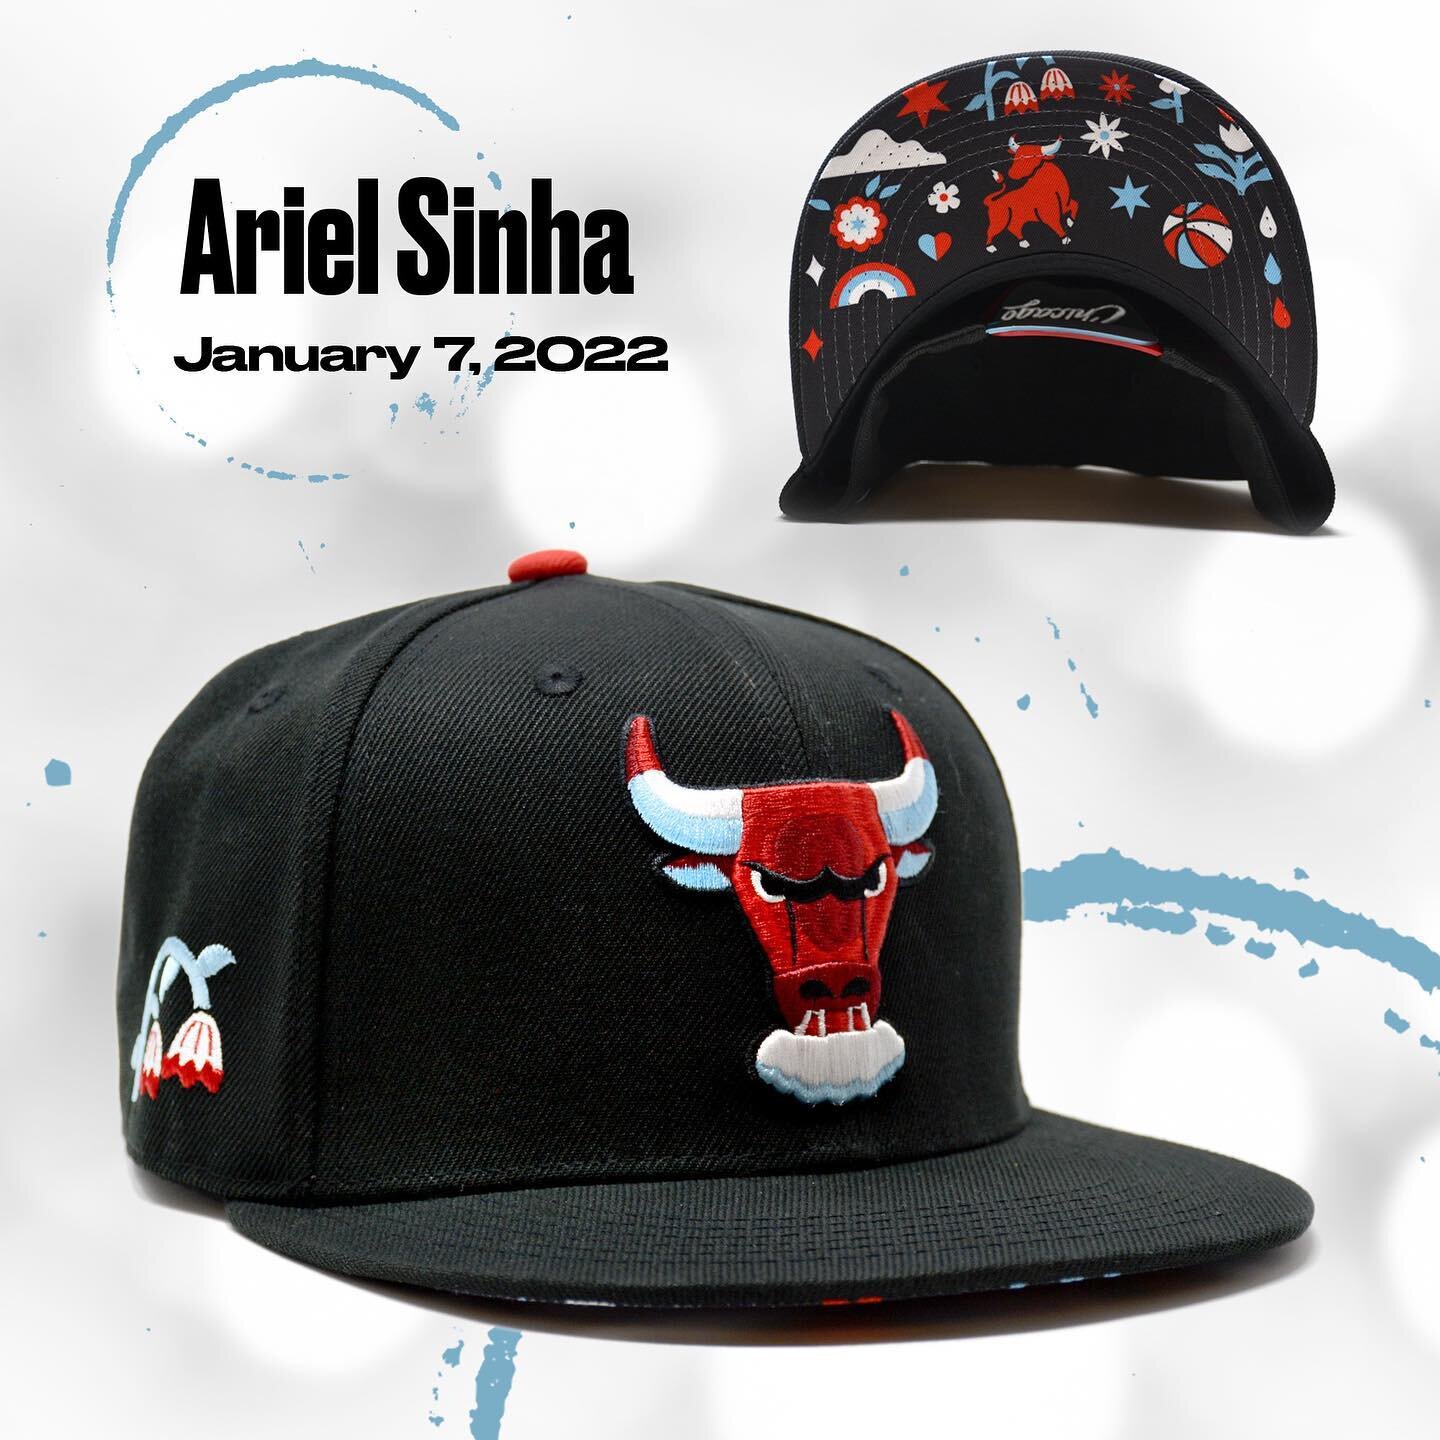 It&rsquo;s been so hard to keep this under my lid, but I finally get to reveal the hat I designed for the @chicagobulls!! This cappy cap is part of the 4th year of the Bulls&rsquo; artist series and will be the game night giveaway to the first 5,000 